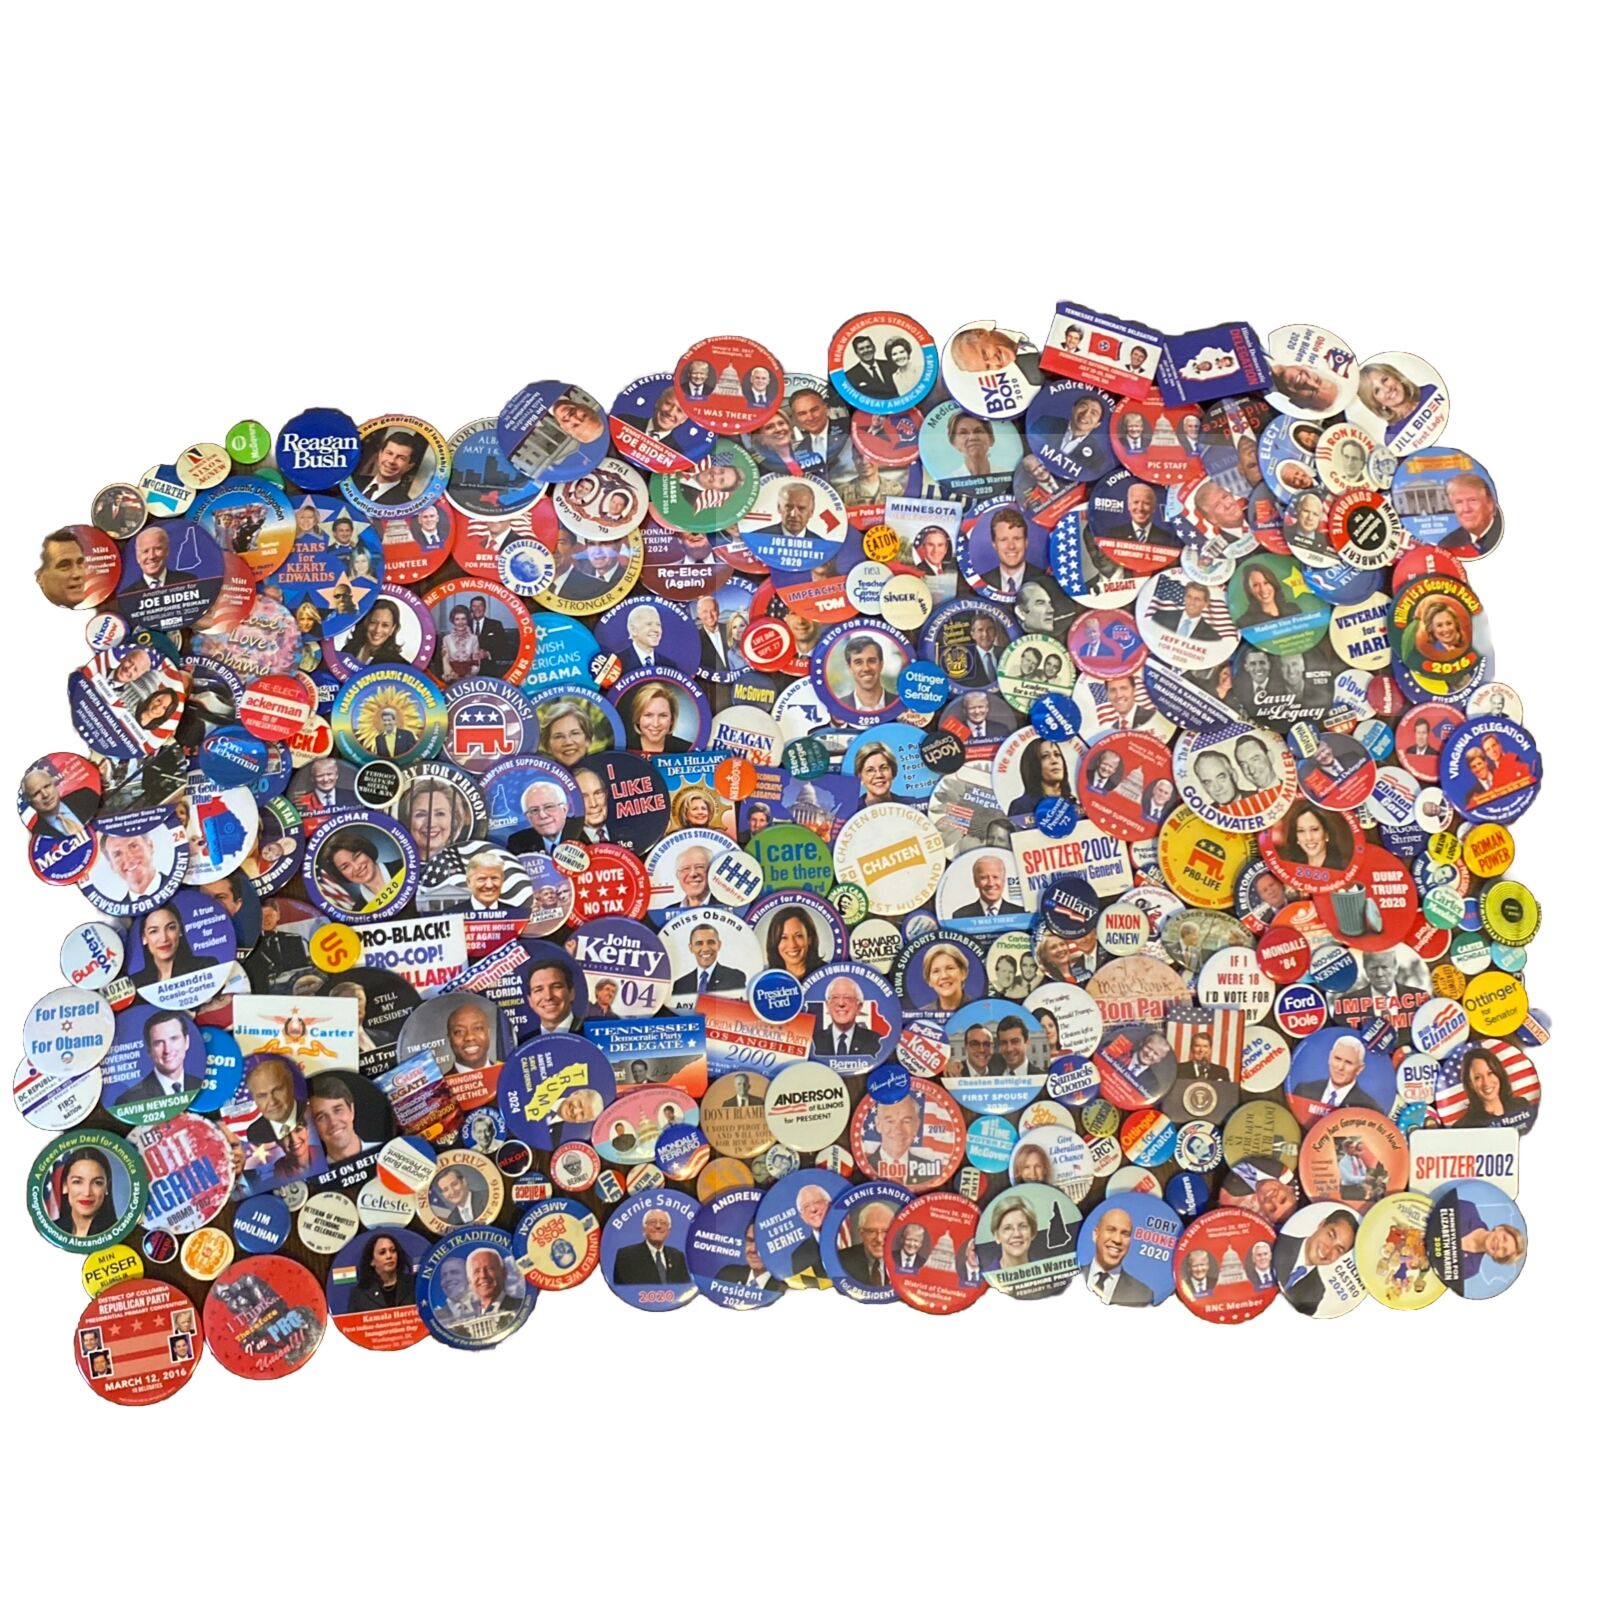 300 different Political Presidential & hopefuls candidates Button Dealer Lot